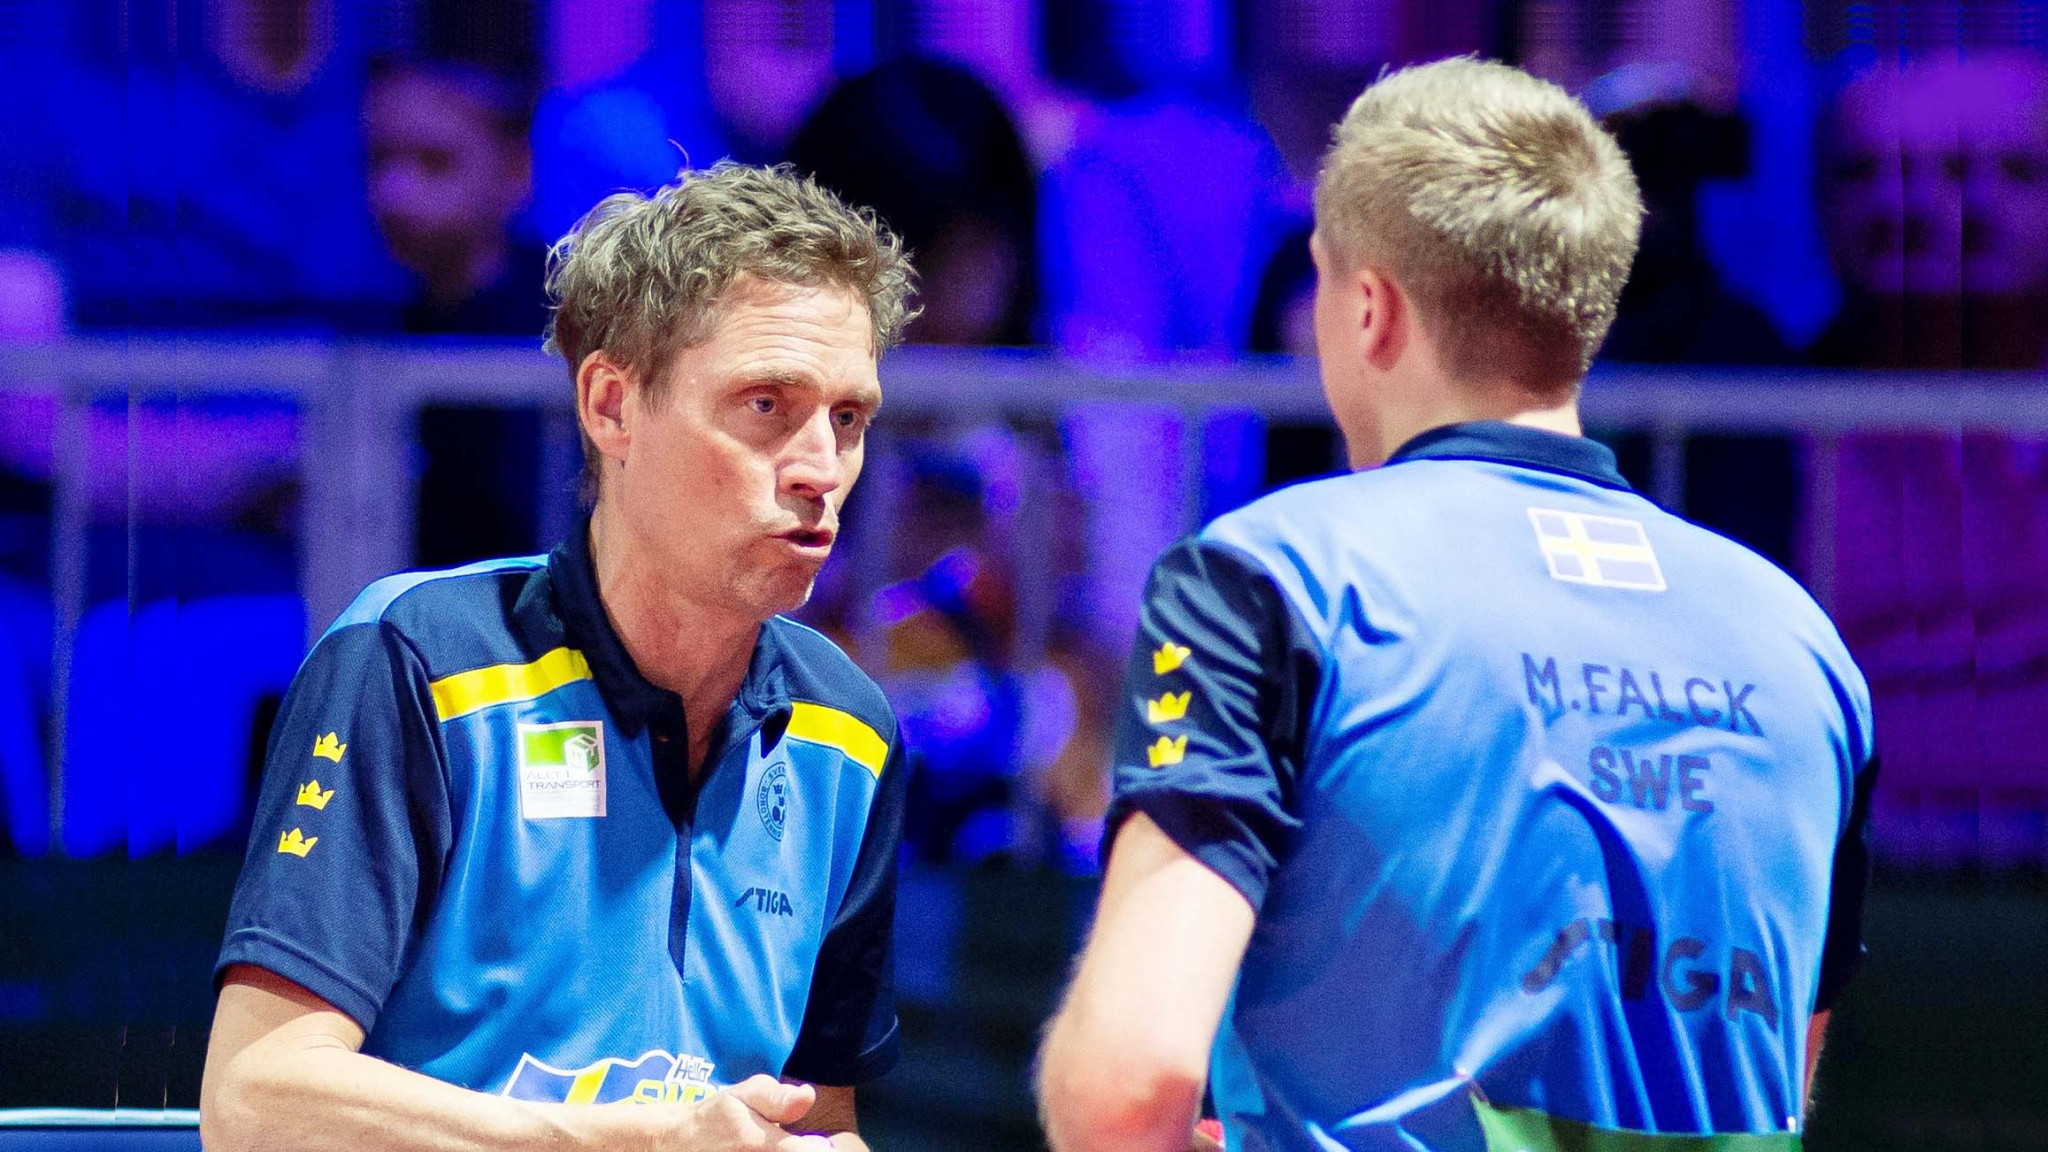 Jörgen Persson returns to the team that he won accolades with during the 1980s and 1990s ©Twitter/@ITTFworld